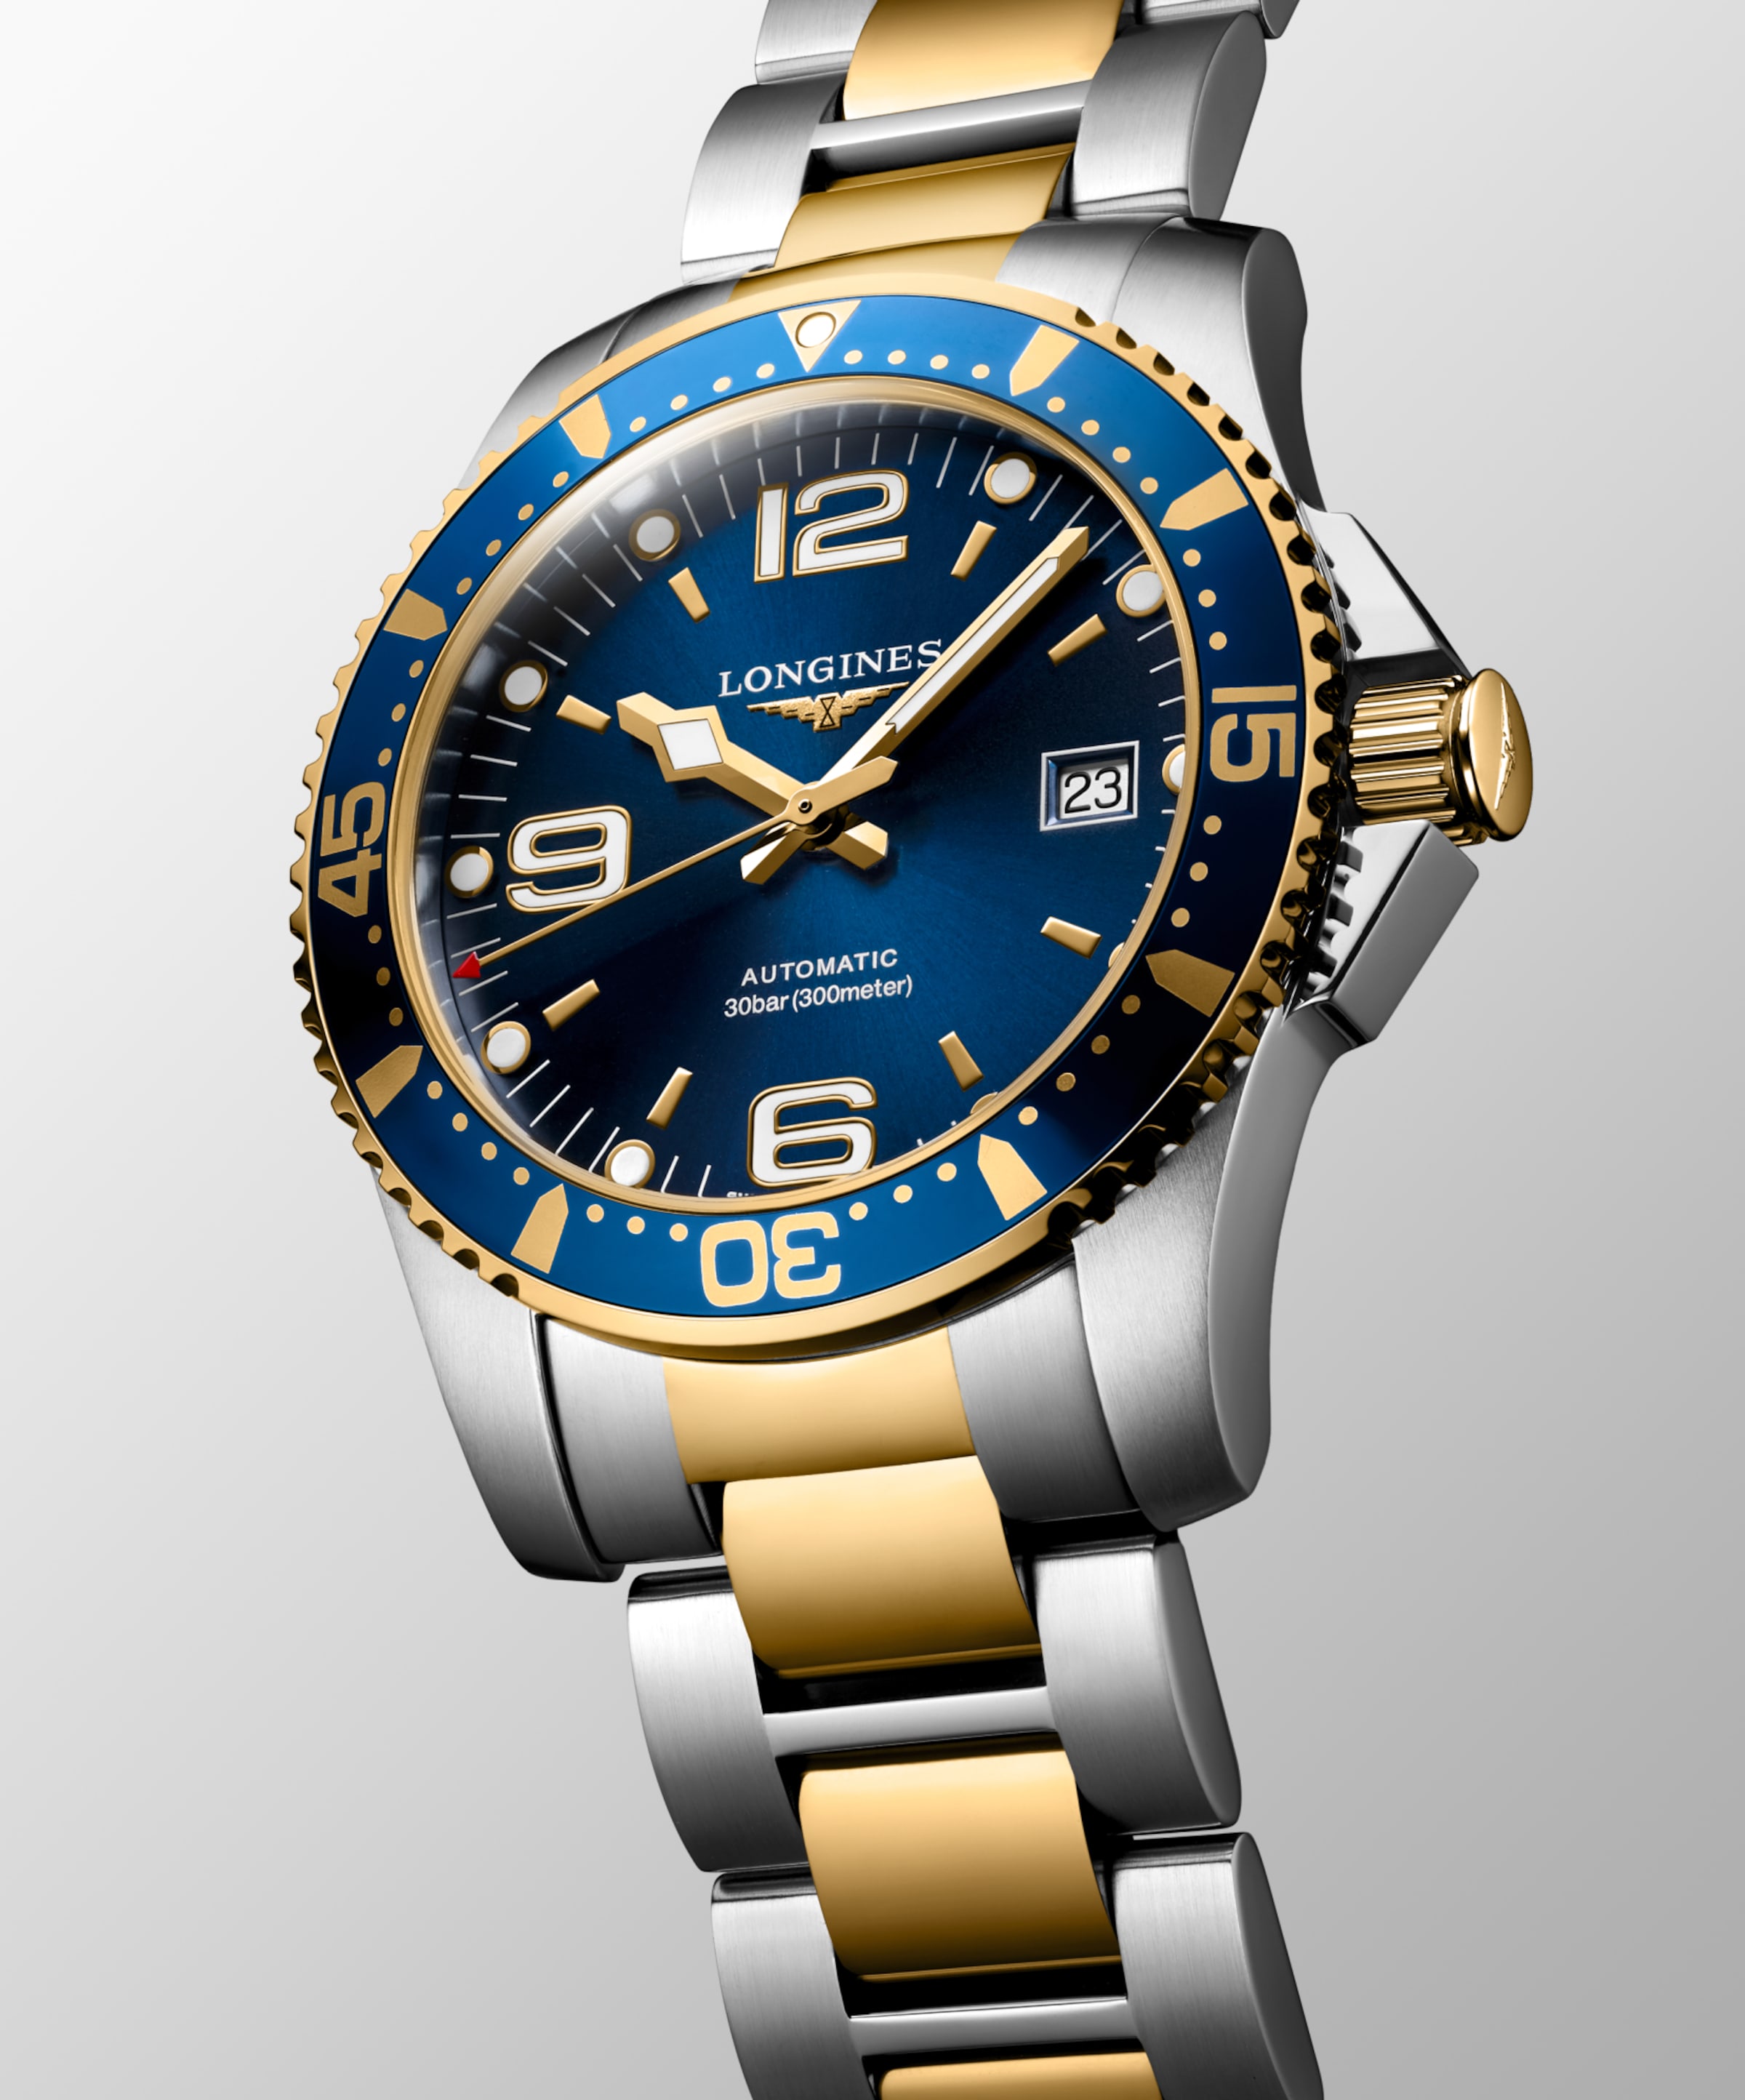 Longines HYDROCONQUEST Automatic Stainless steel and yellow PVD coating Watch - L3.742.3.96.7